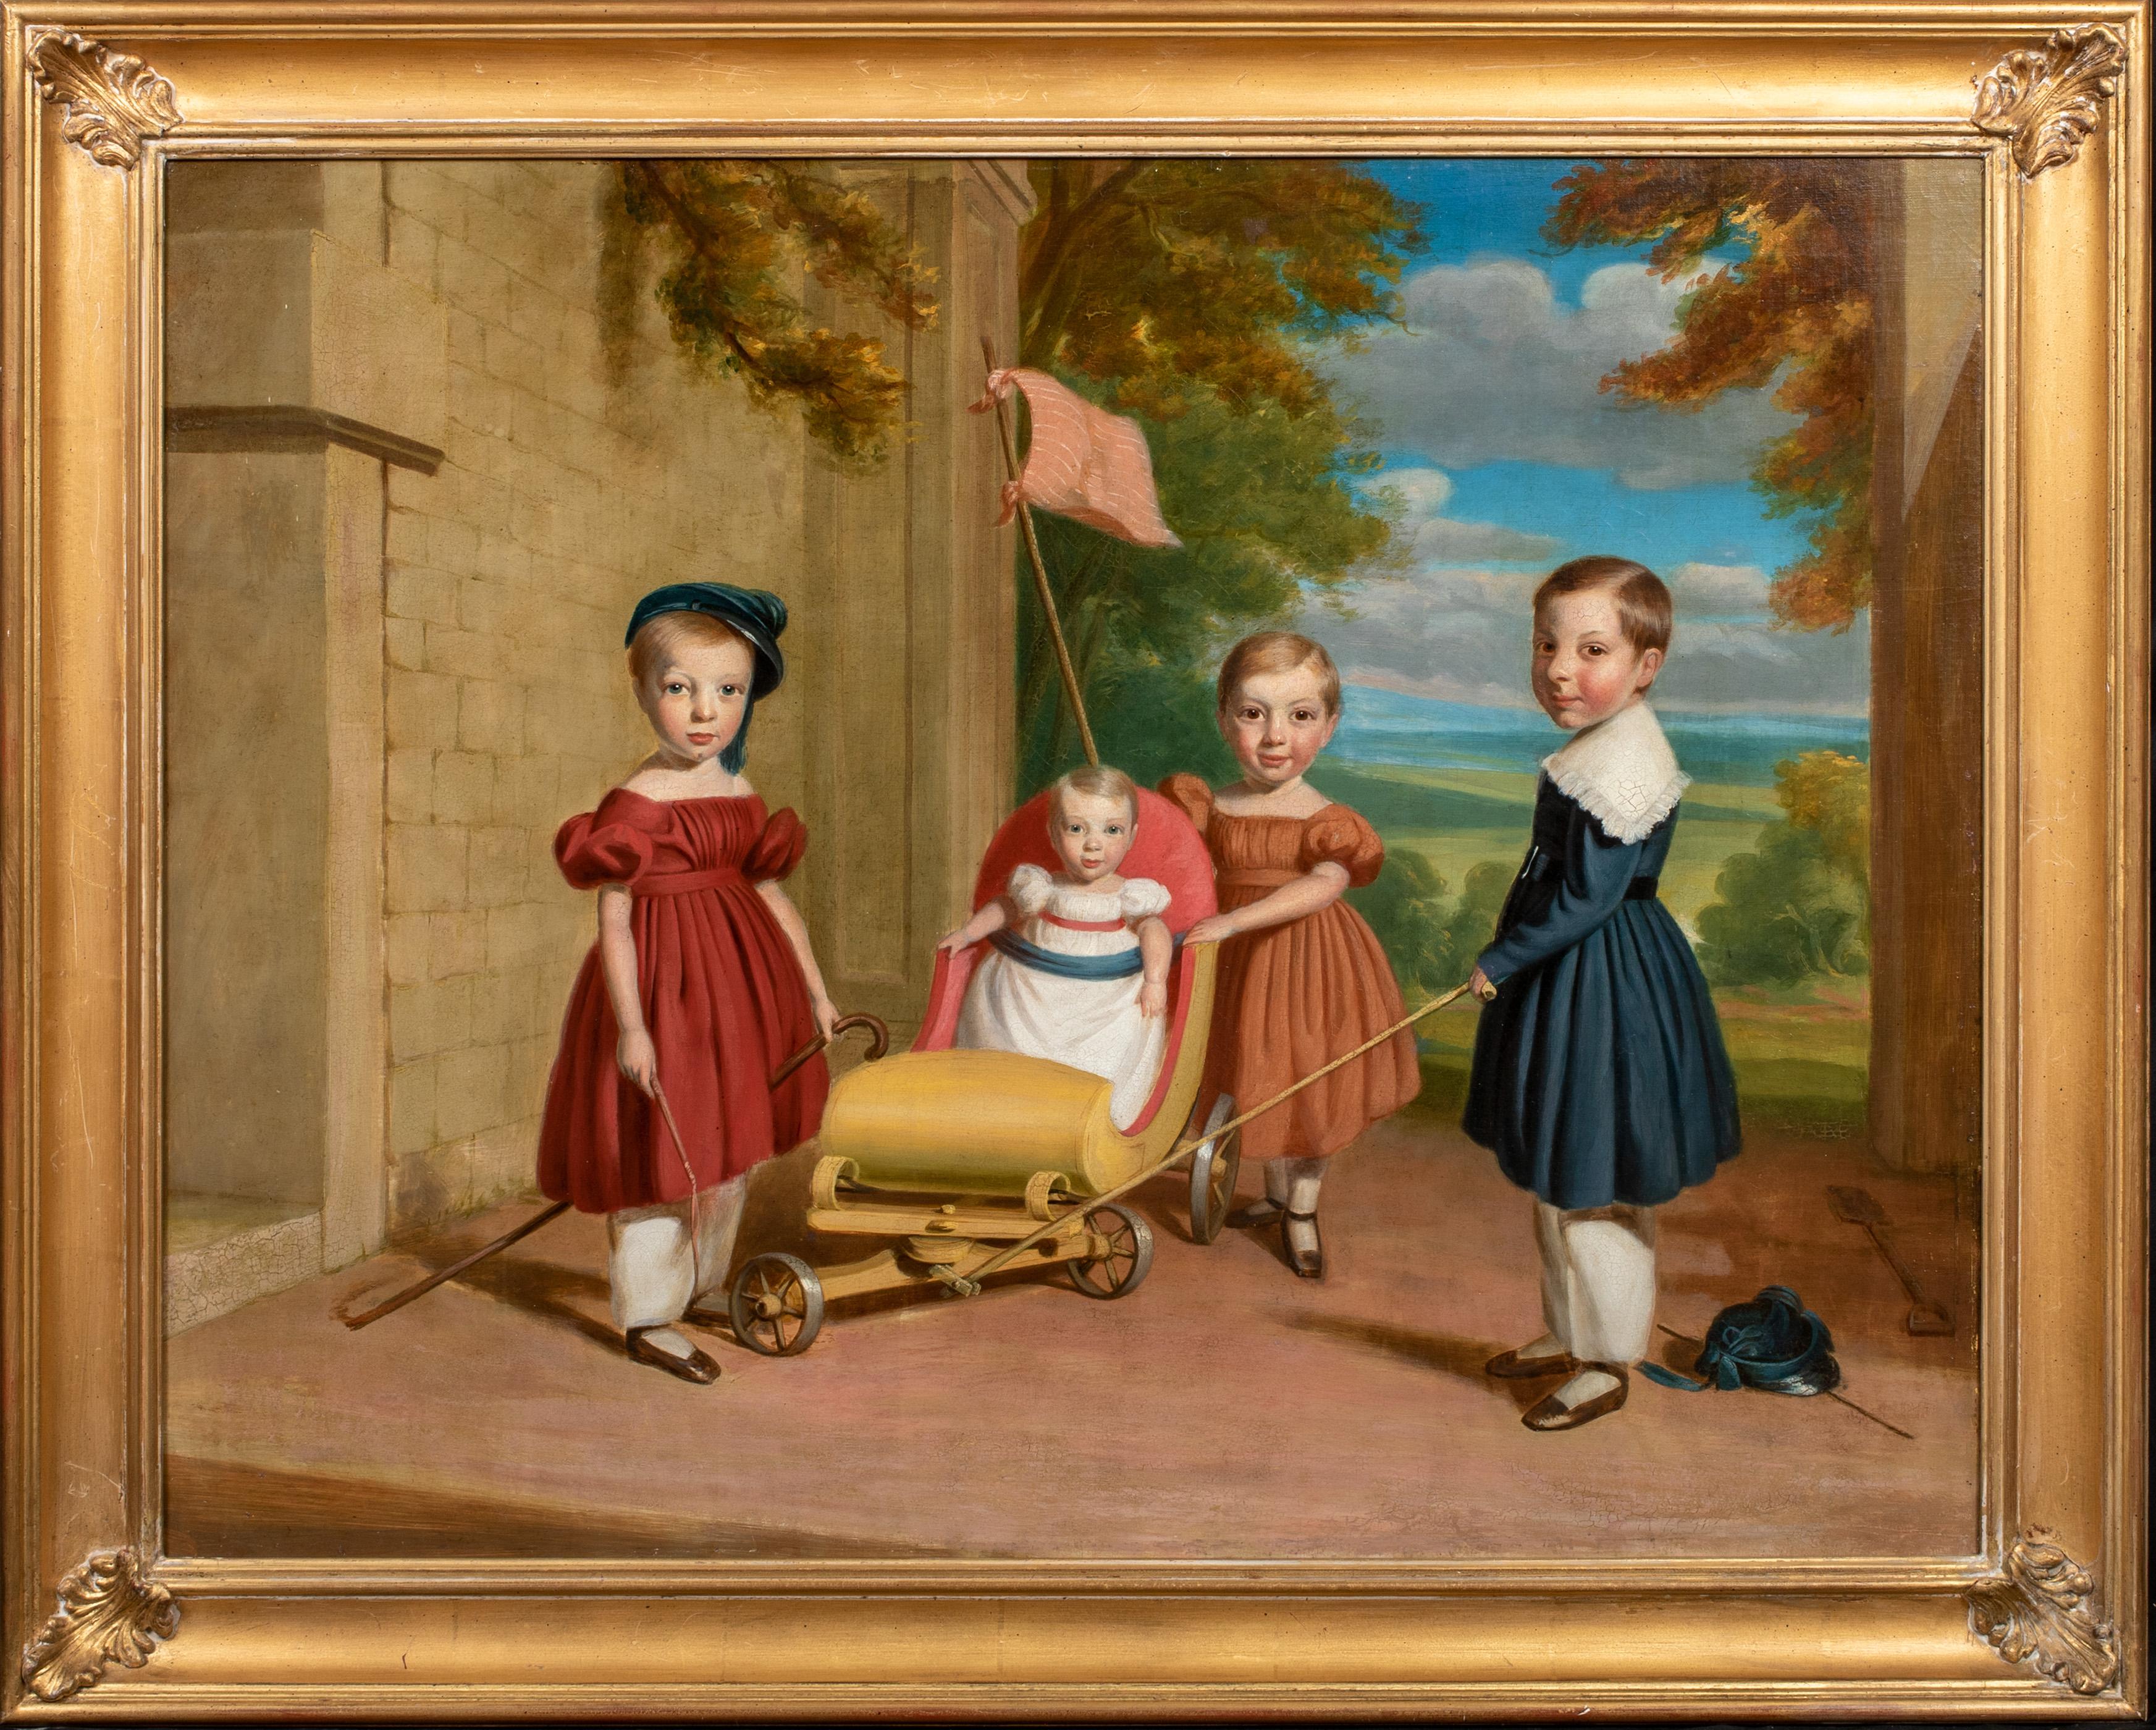 Unknown Figurative Painting - Portrait Of Children Playing, 19th Century American School